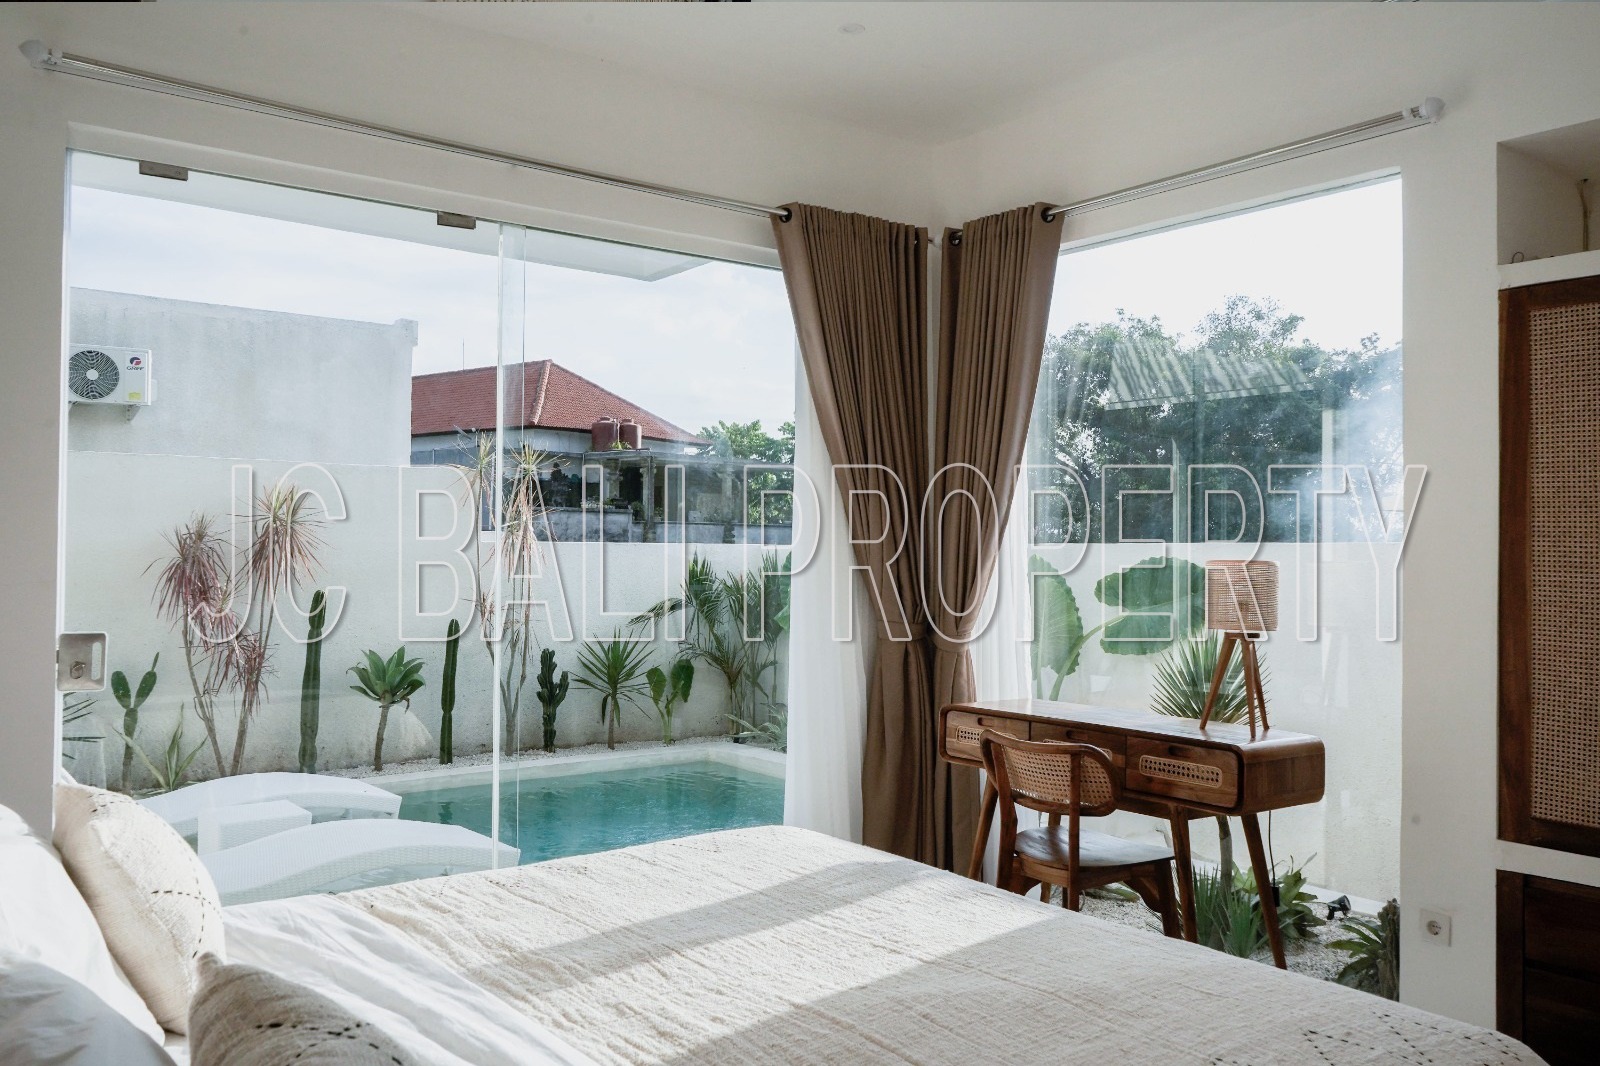 EXQUISITE CONTEMPORARY VILLA FOR RENT MONTHLY IN BUDUK, BALI